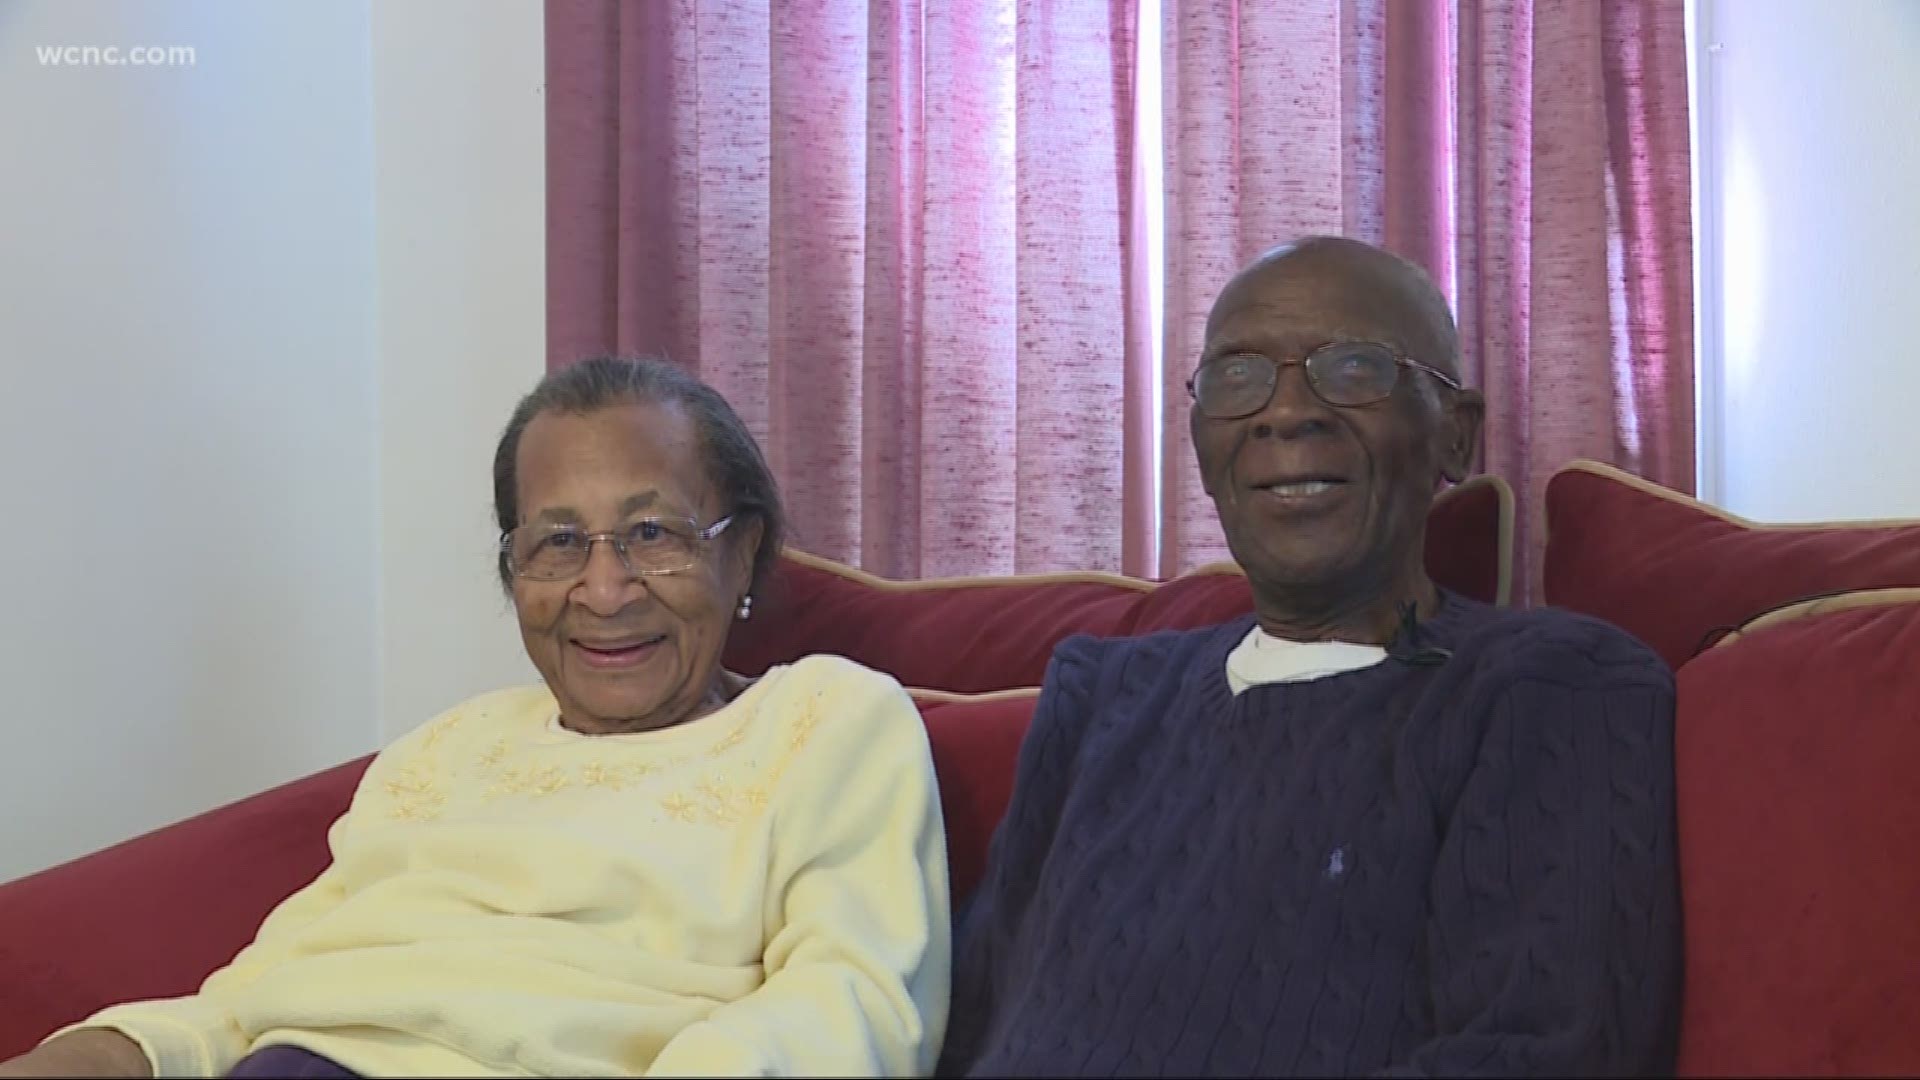 D.W. and Willie Williams have been married for 82 years. They say they have never been the type to fuss or fight, and credit their longevity to God and their faith.